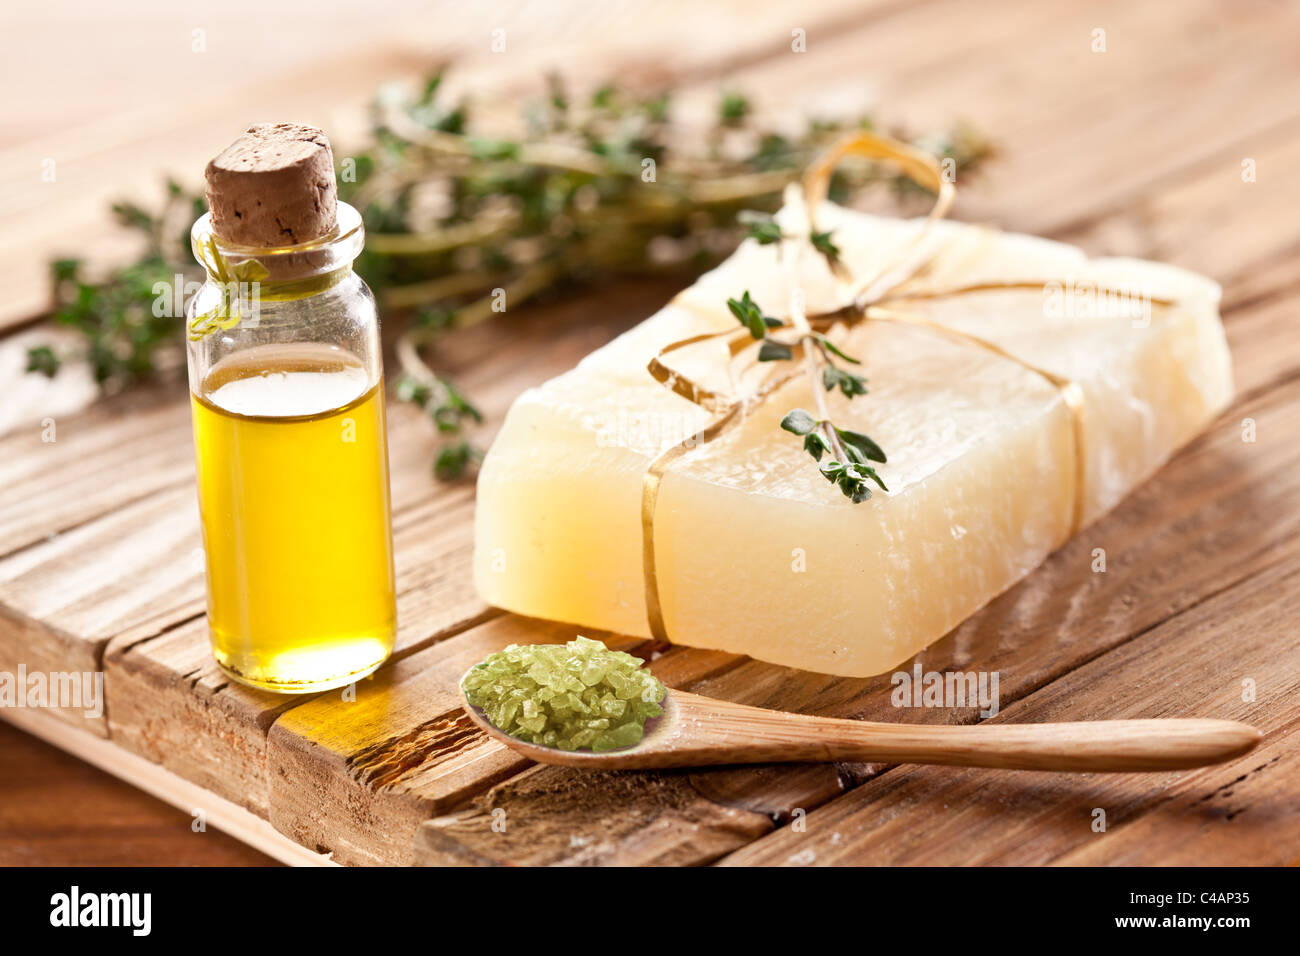 Piece of natural soap with thyme. Stock Photo